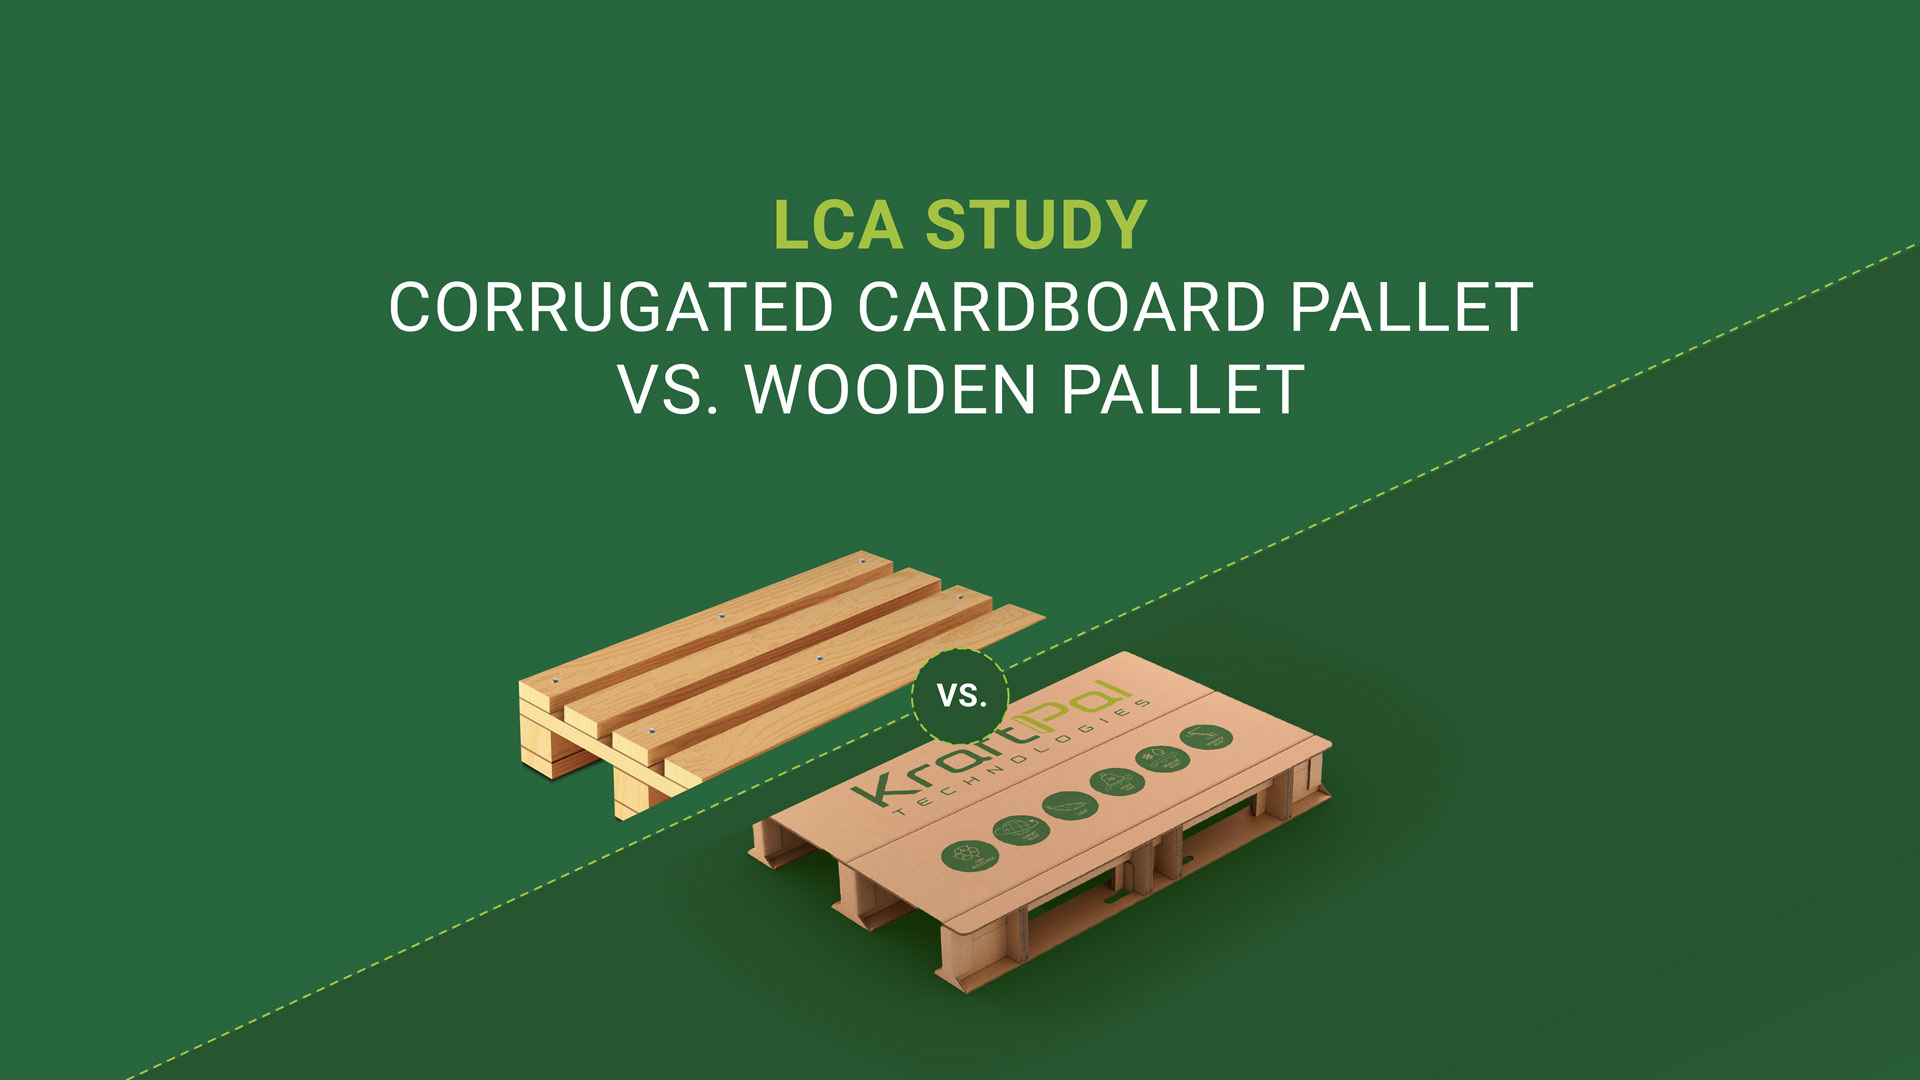 LCA Study finds Corrugated Cardboard Pallets as the most ‘nature-friendly’ standardized loading platform